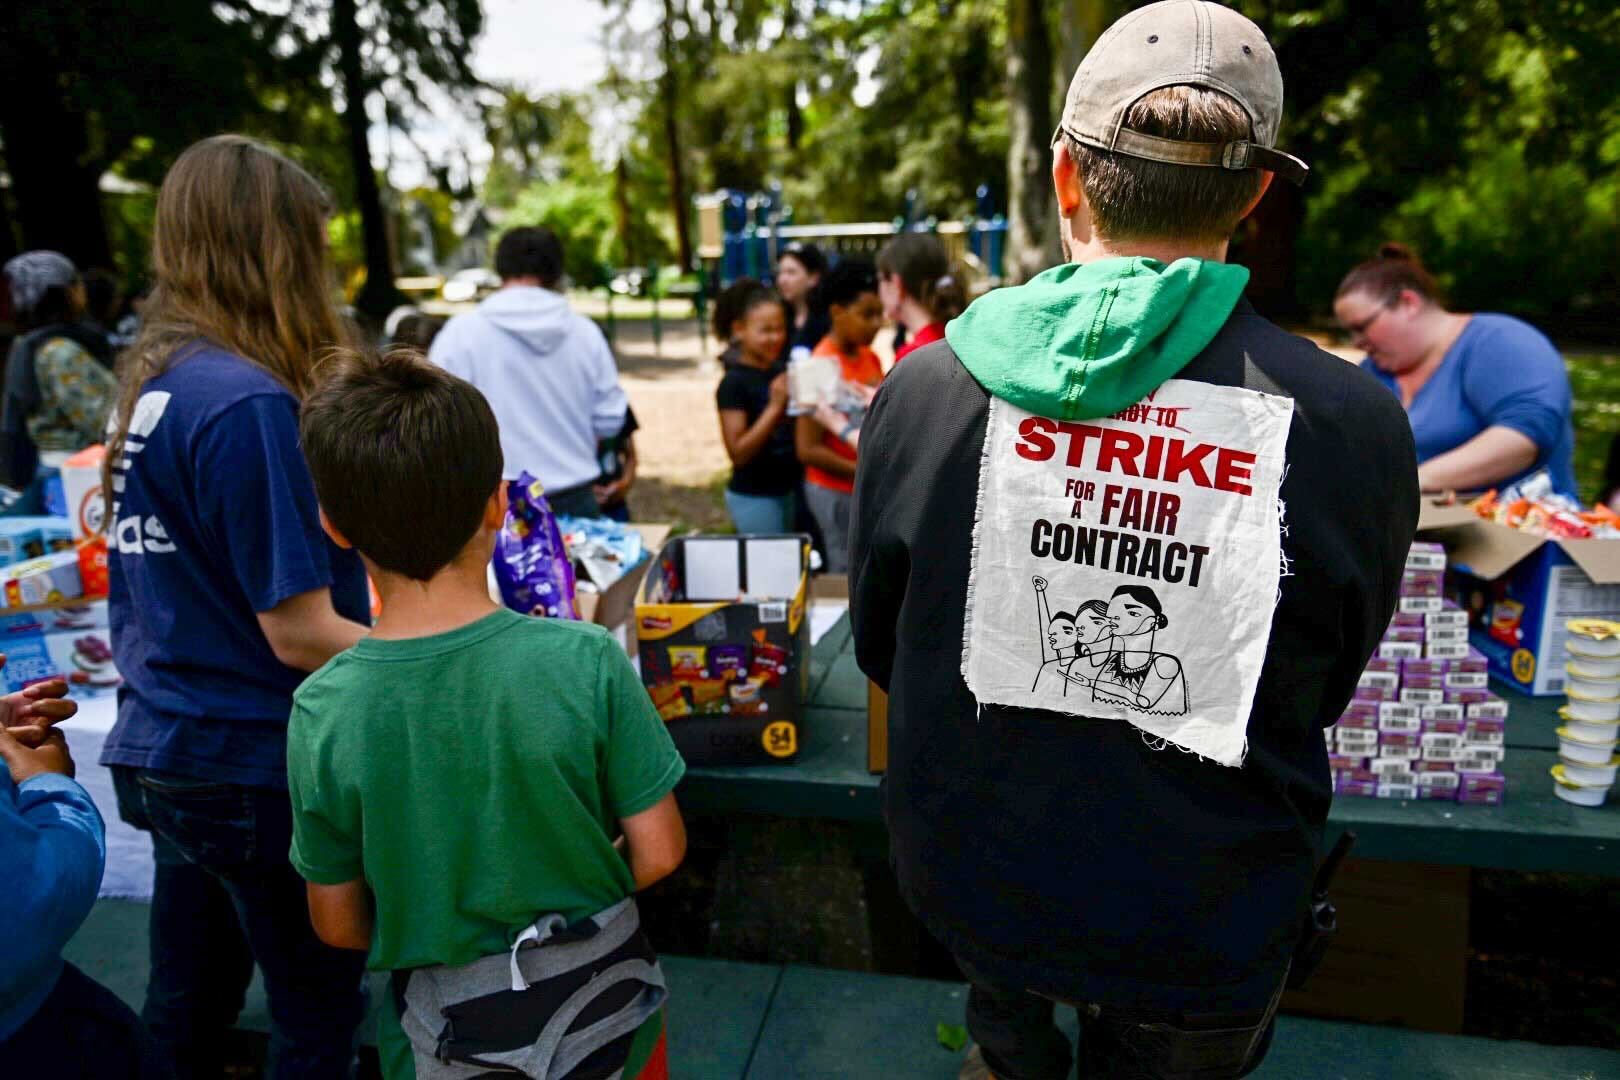 A man wears a black jacket with a white patch with red and black print that reads,"Strike for a fair contract." He stands next to a boy wearing a green T-shirt. The two are in front of a green picnic table that has many snacks and juice boxes on top of it. Many children and parents are seen in the background, along with a blue playground structure shaded by lush trees.